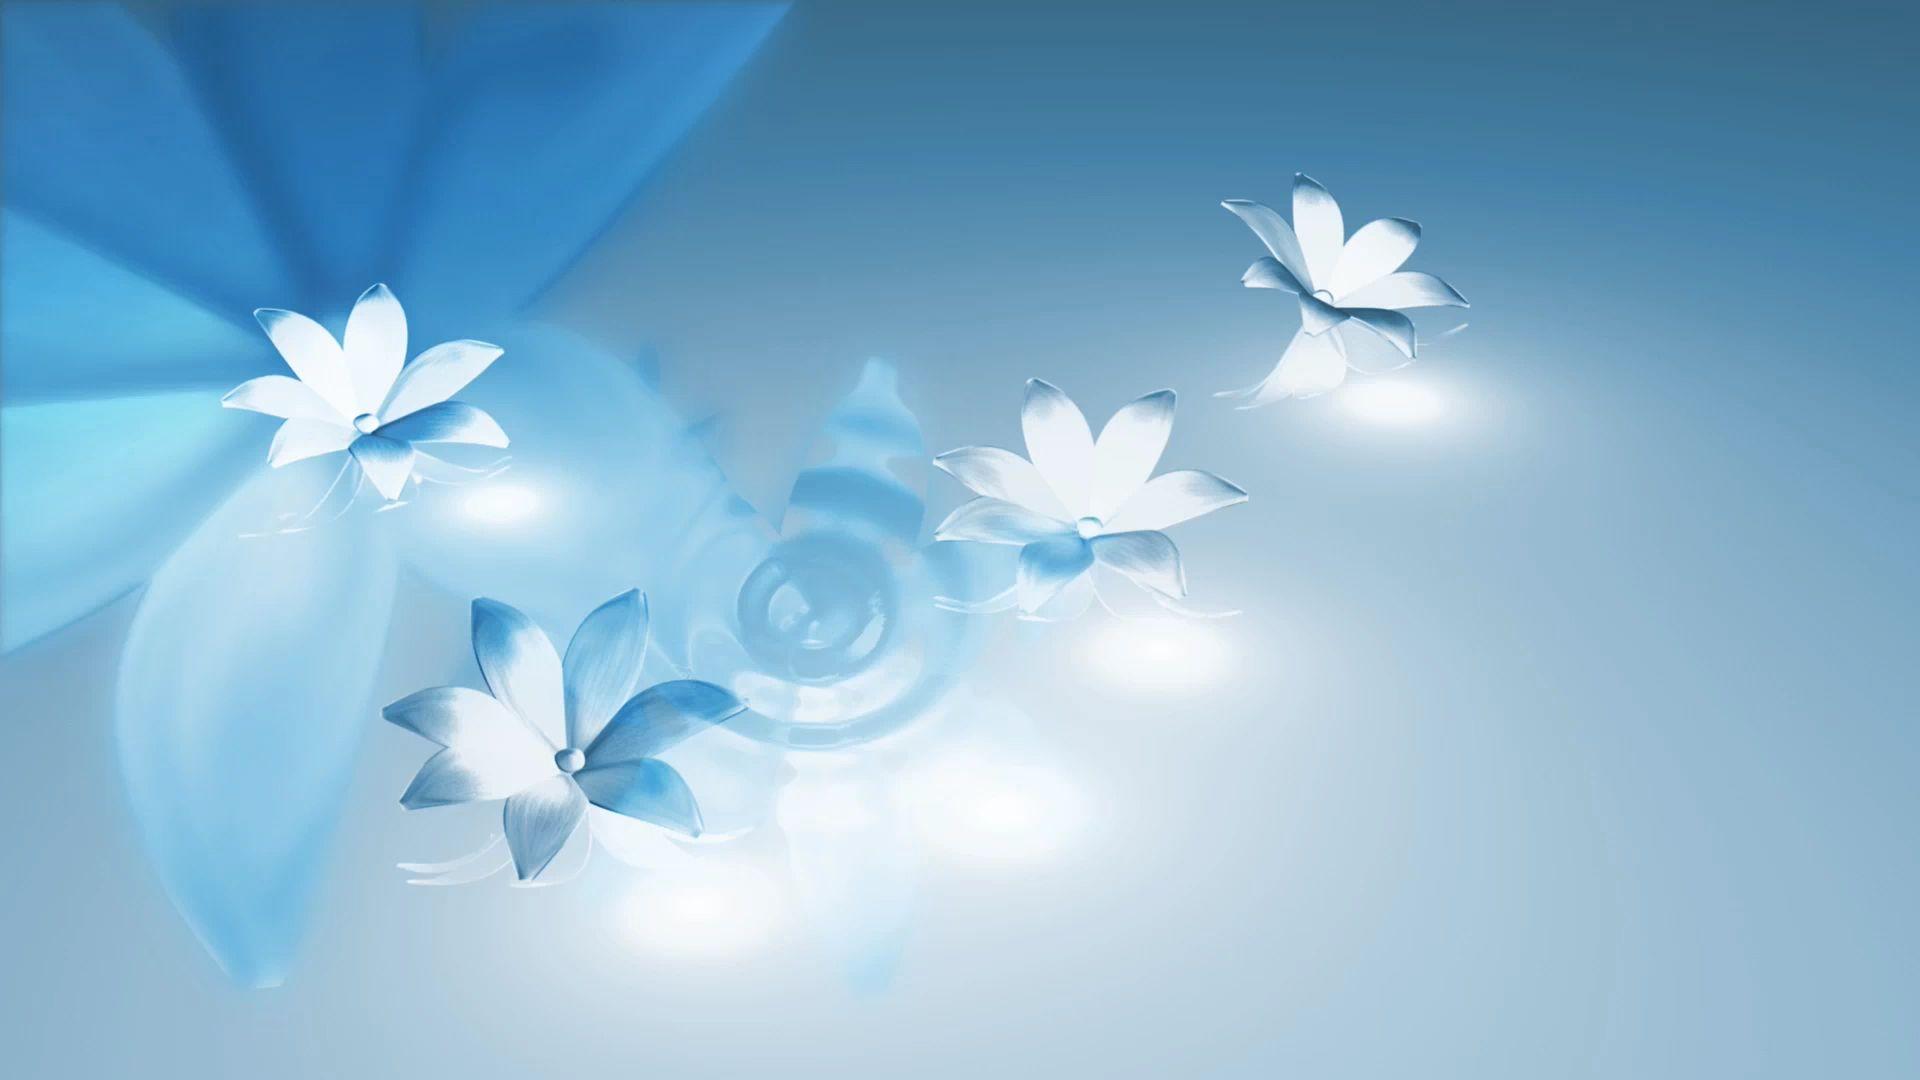 sky blue flower background 13. Background Check All